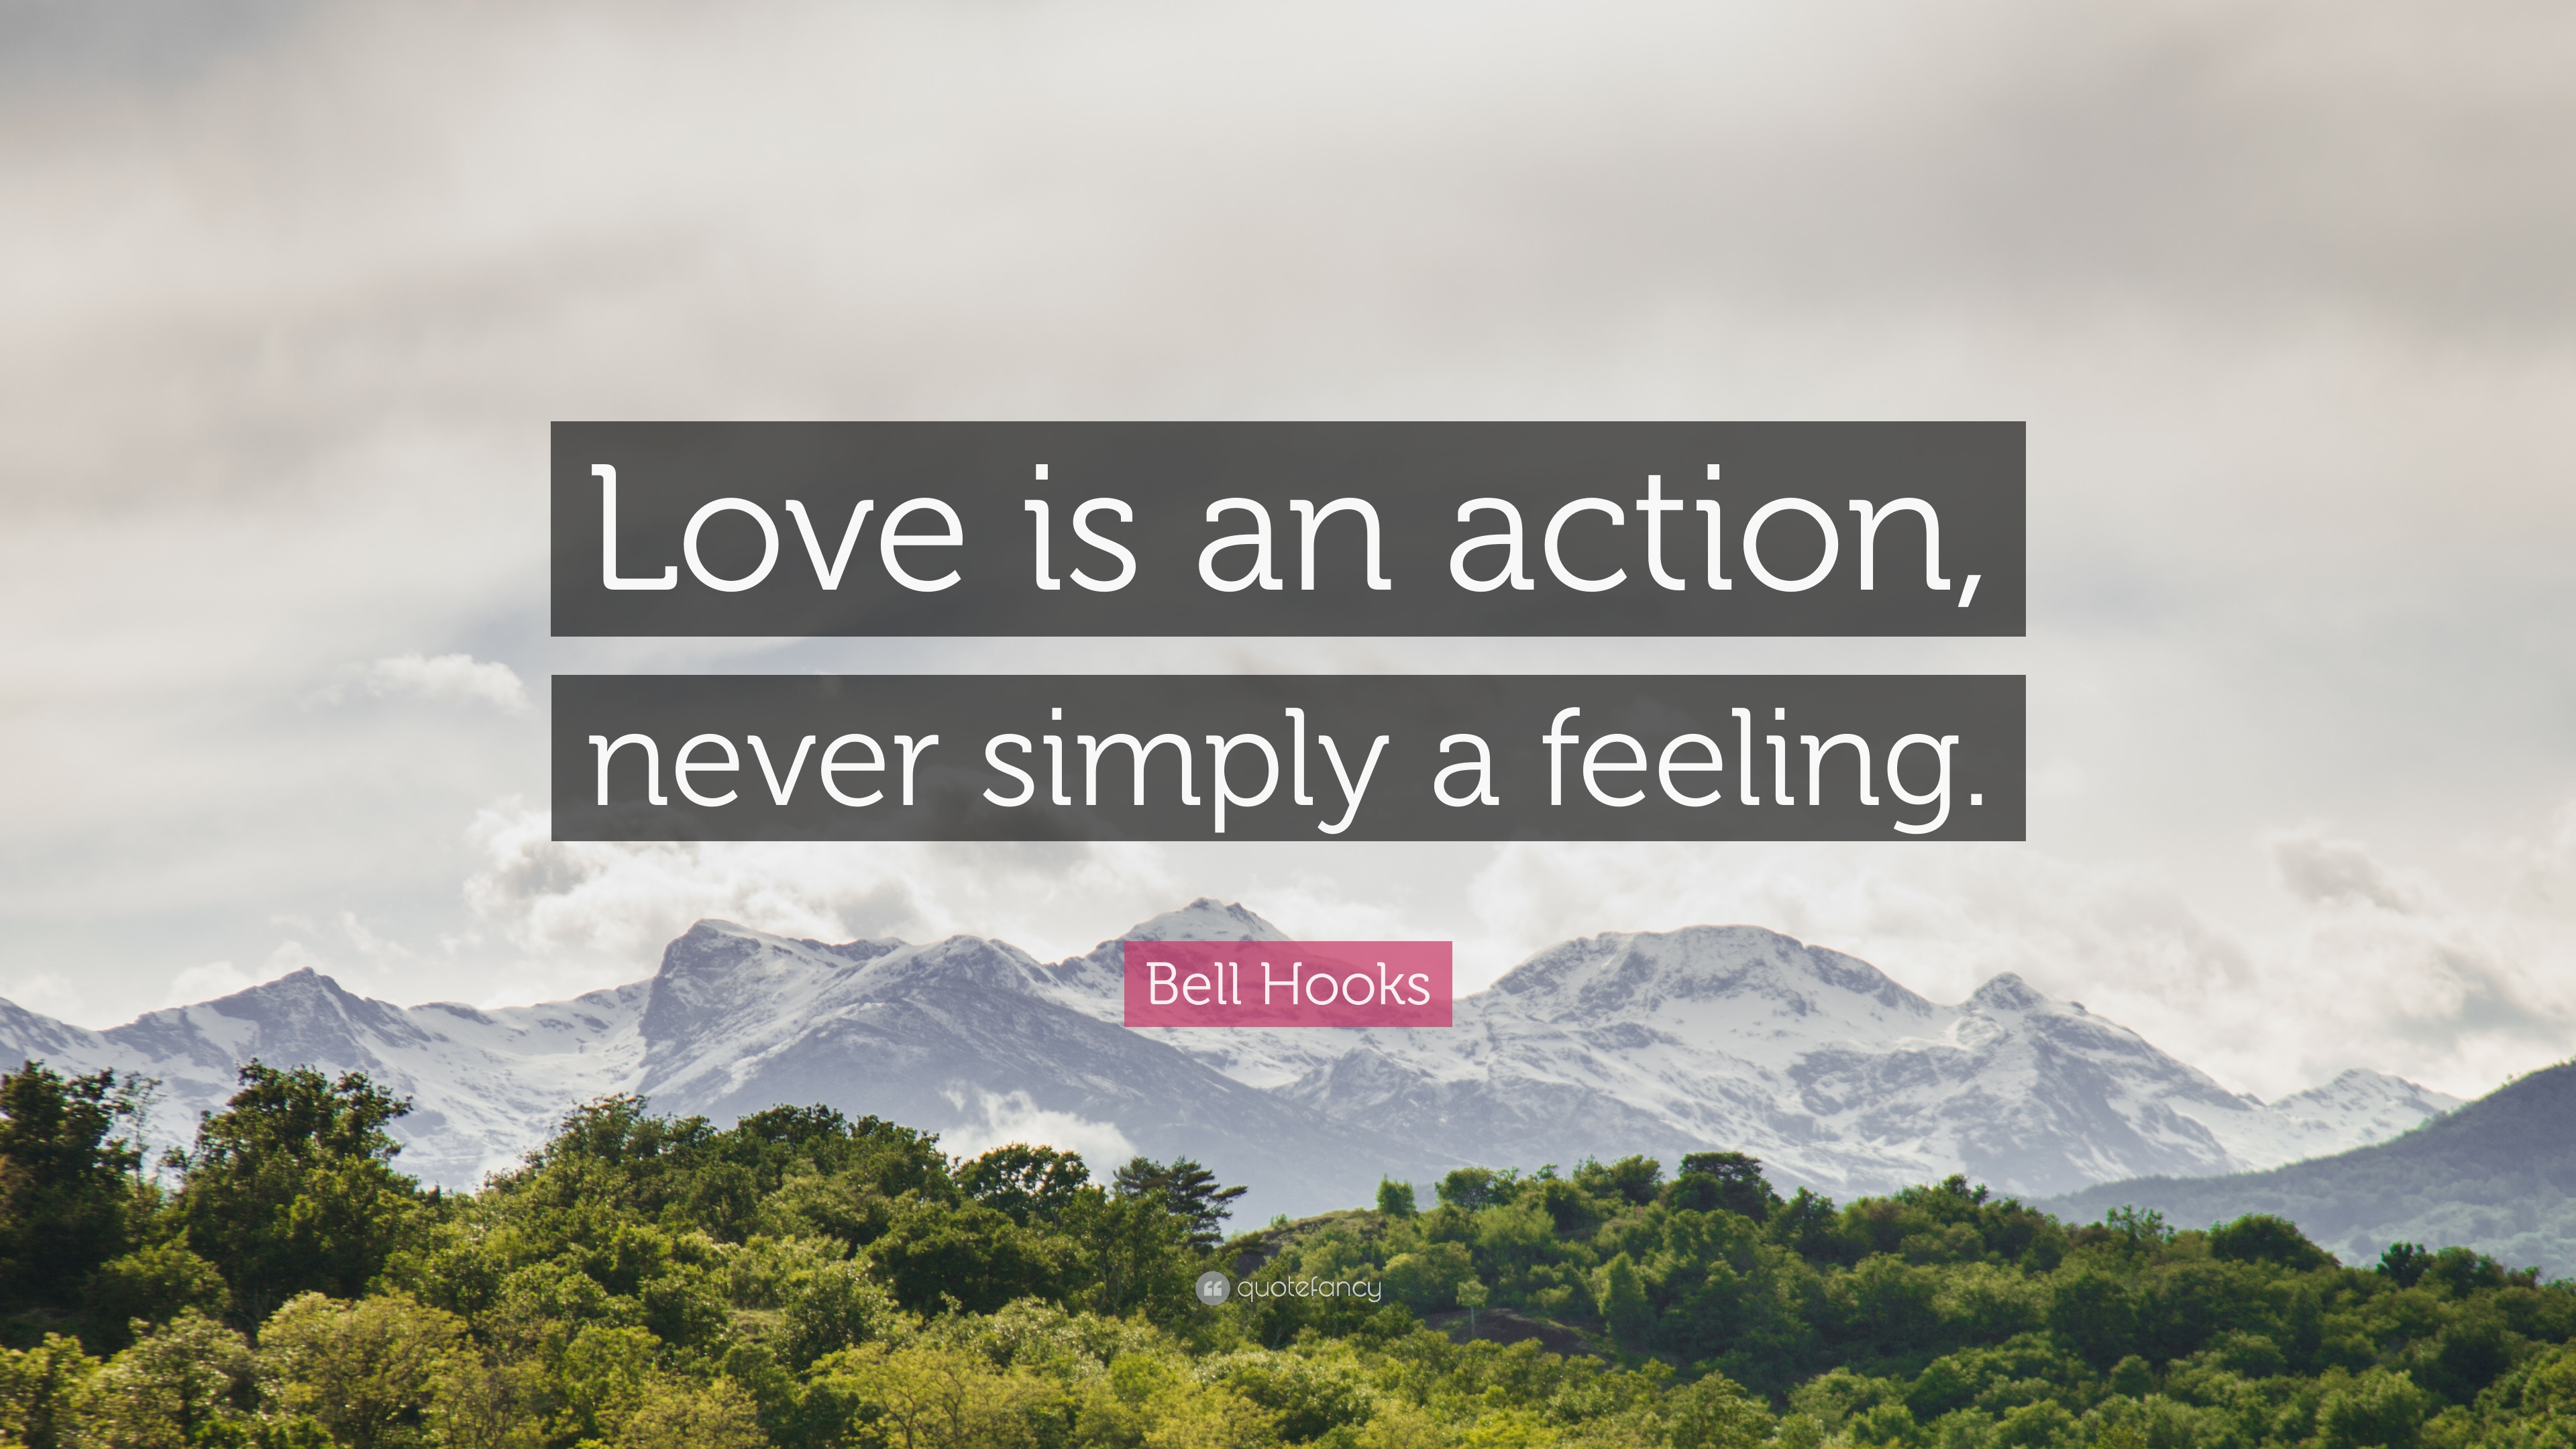 Bell Hooks Quote: “Love is an action, never simply a feeling